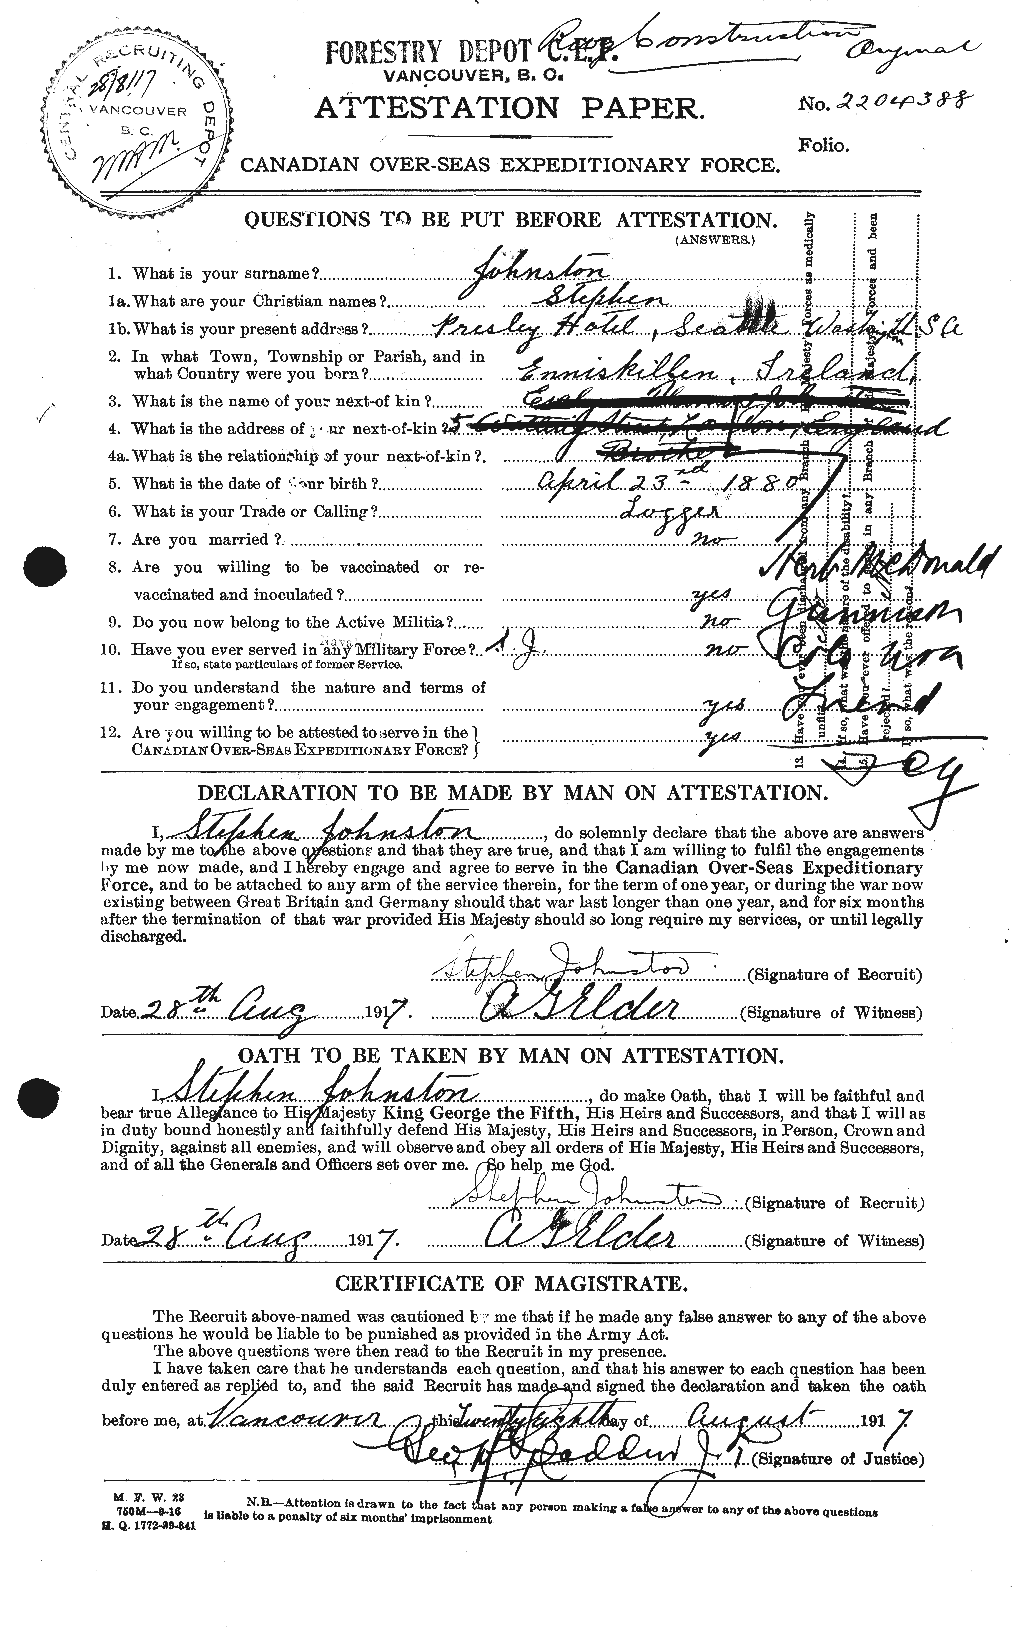 Personnel Records of the First World War - CEF 427108a